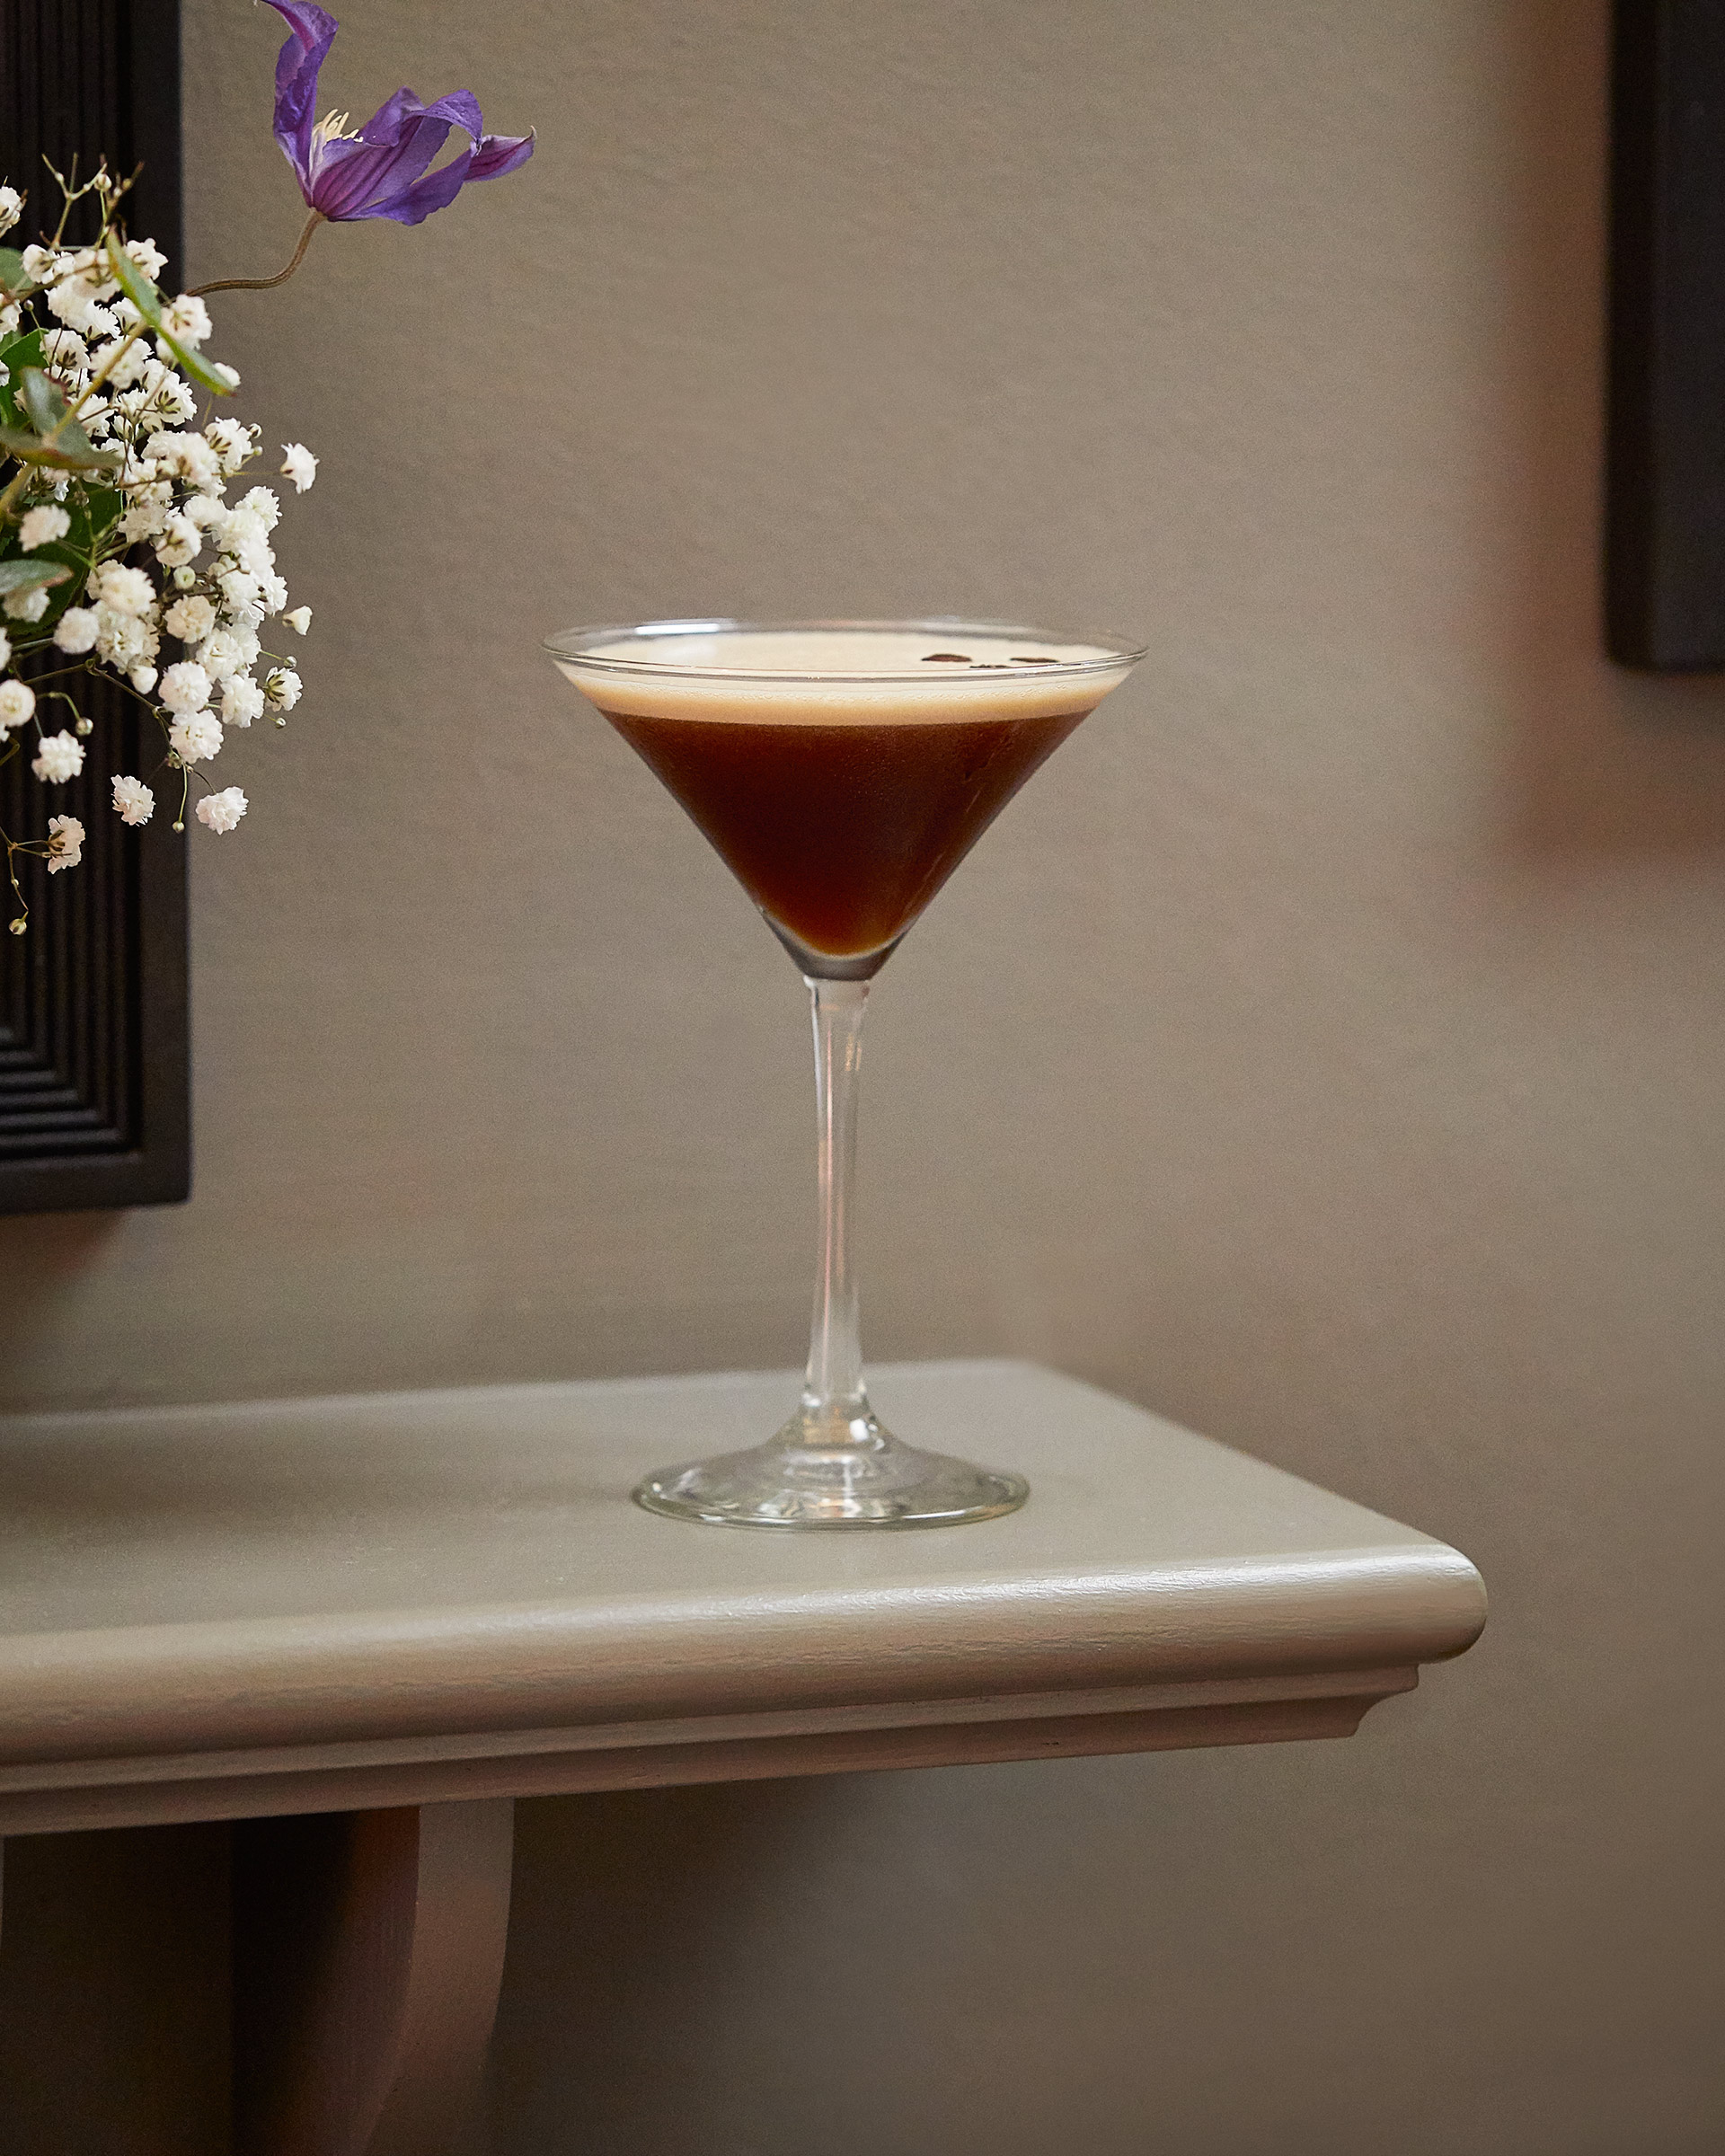 Espresso Martini, The Berystede Hotel. Glasgow food and drink photographer, Alastair Ferrier.